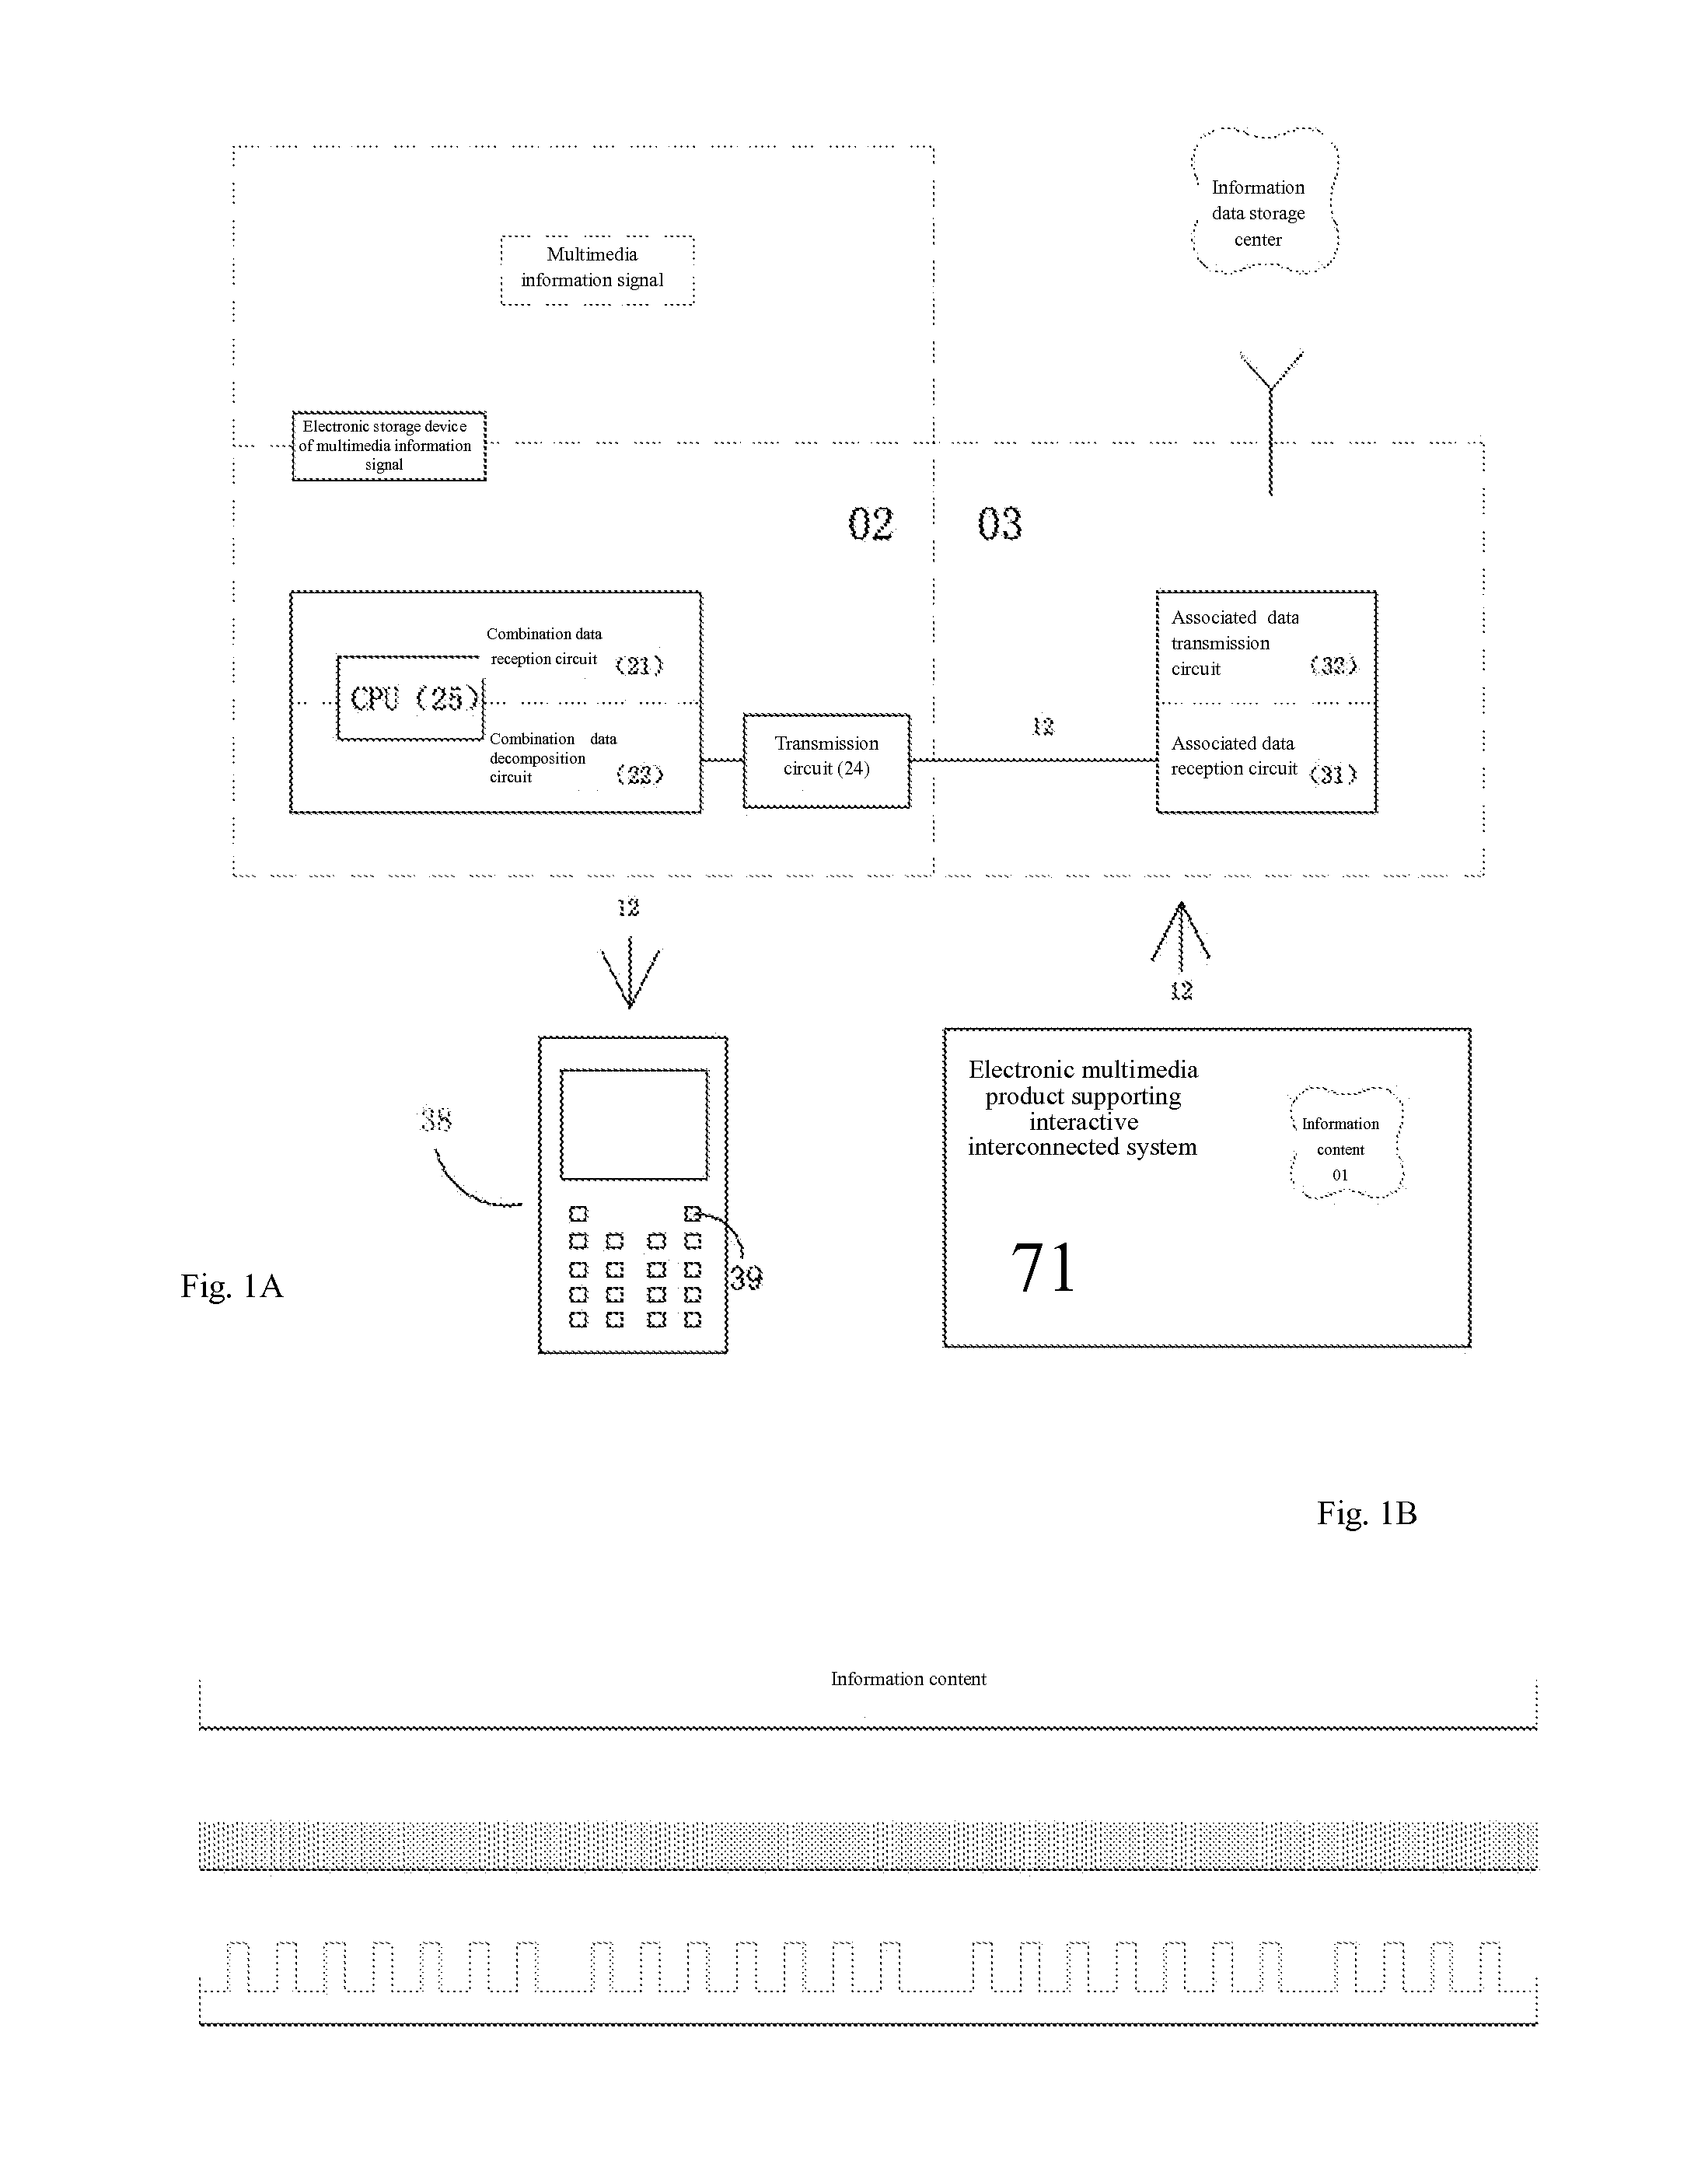 Communication terminal product supporting interactive association system